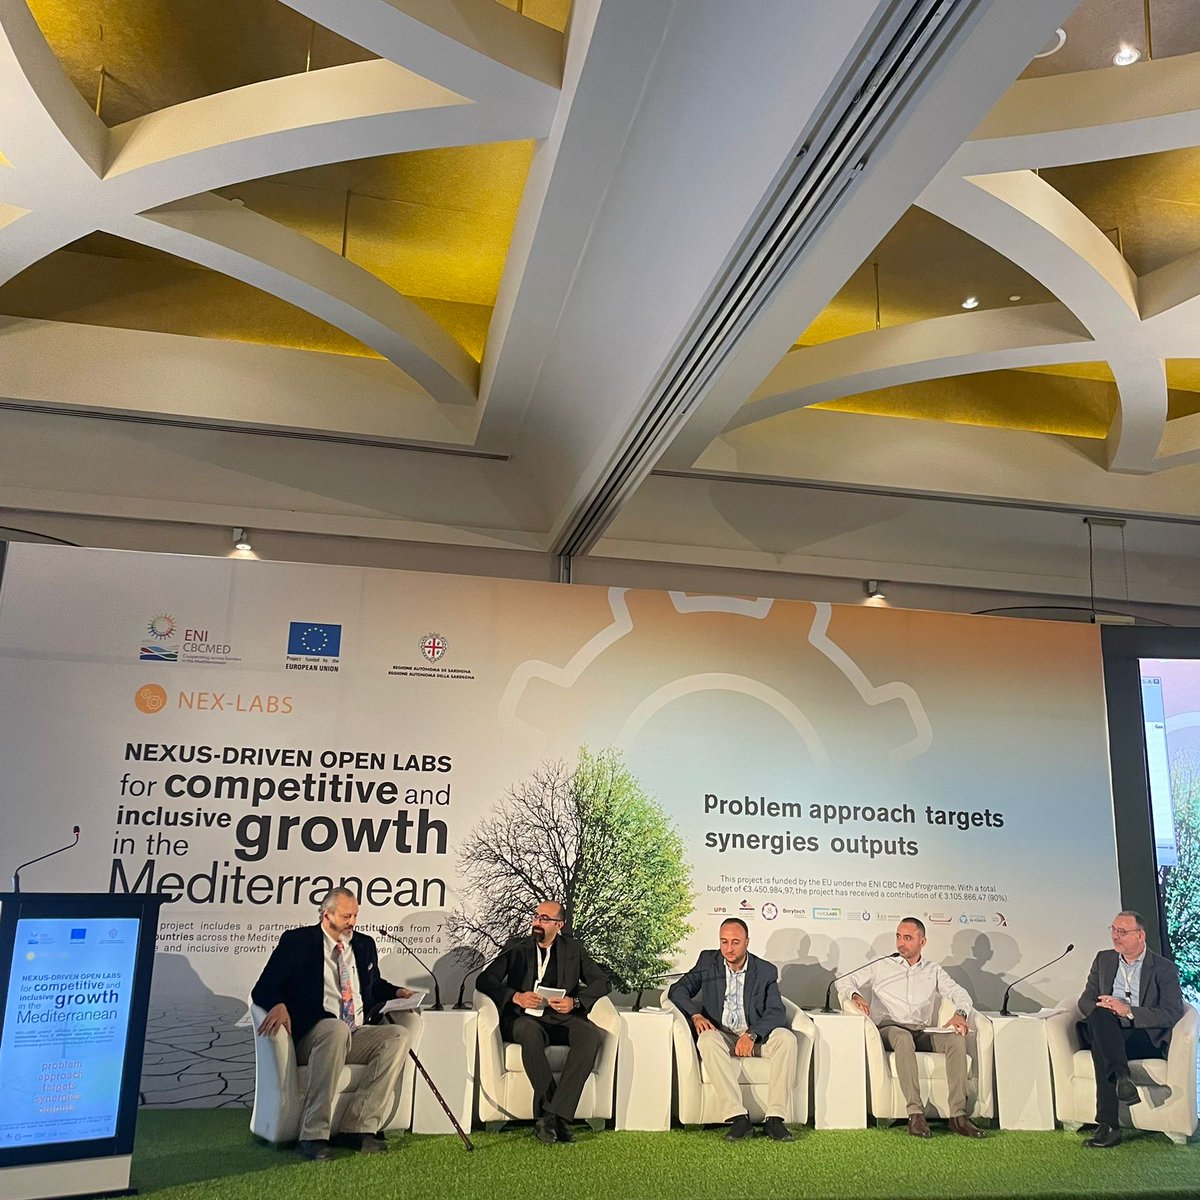 🌱 Green innovation is the name of the game at JES2023! Our panel discussion on supporting green startups, Get ready for insights that can transform industries. #JES2023 #gomed